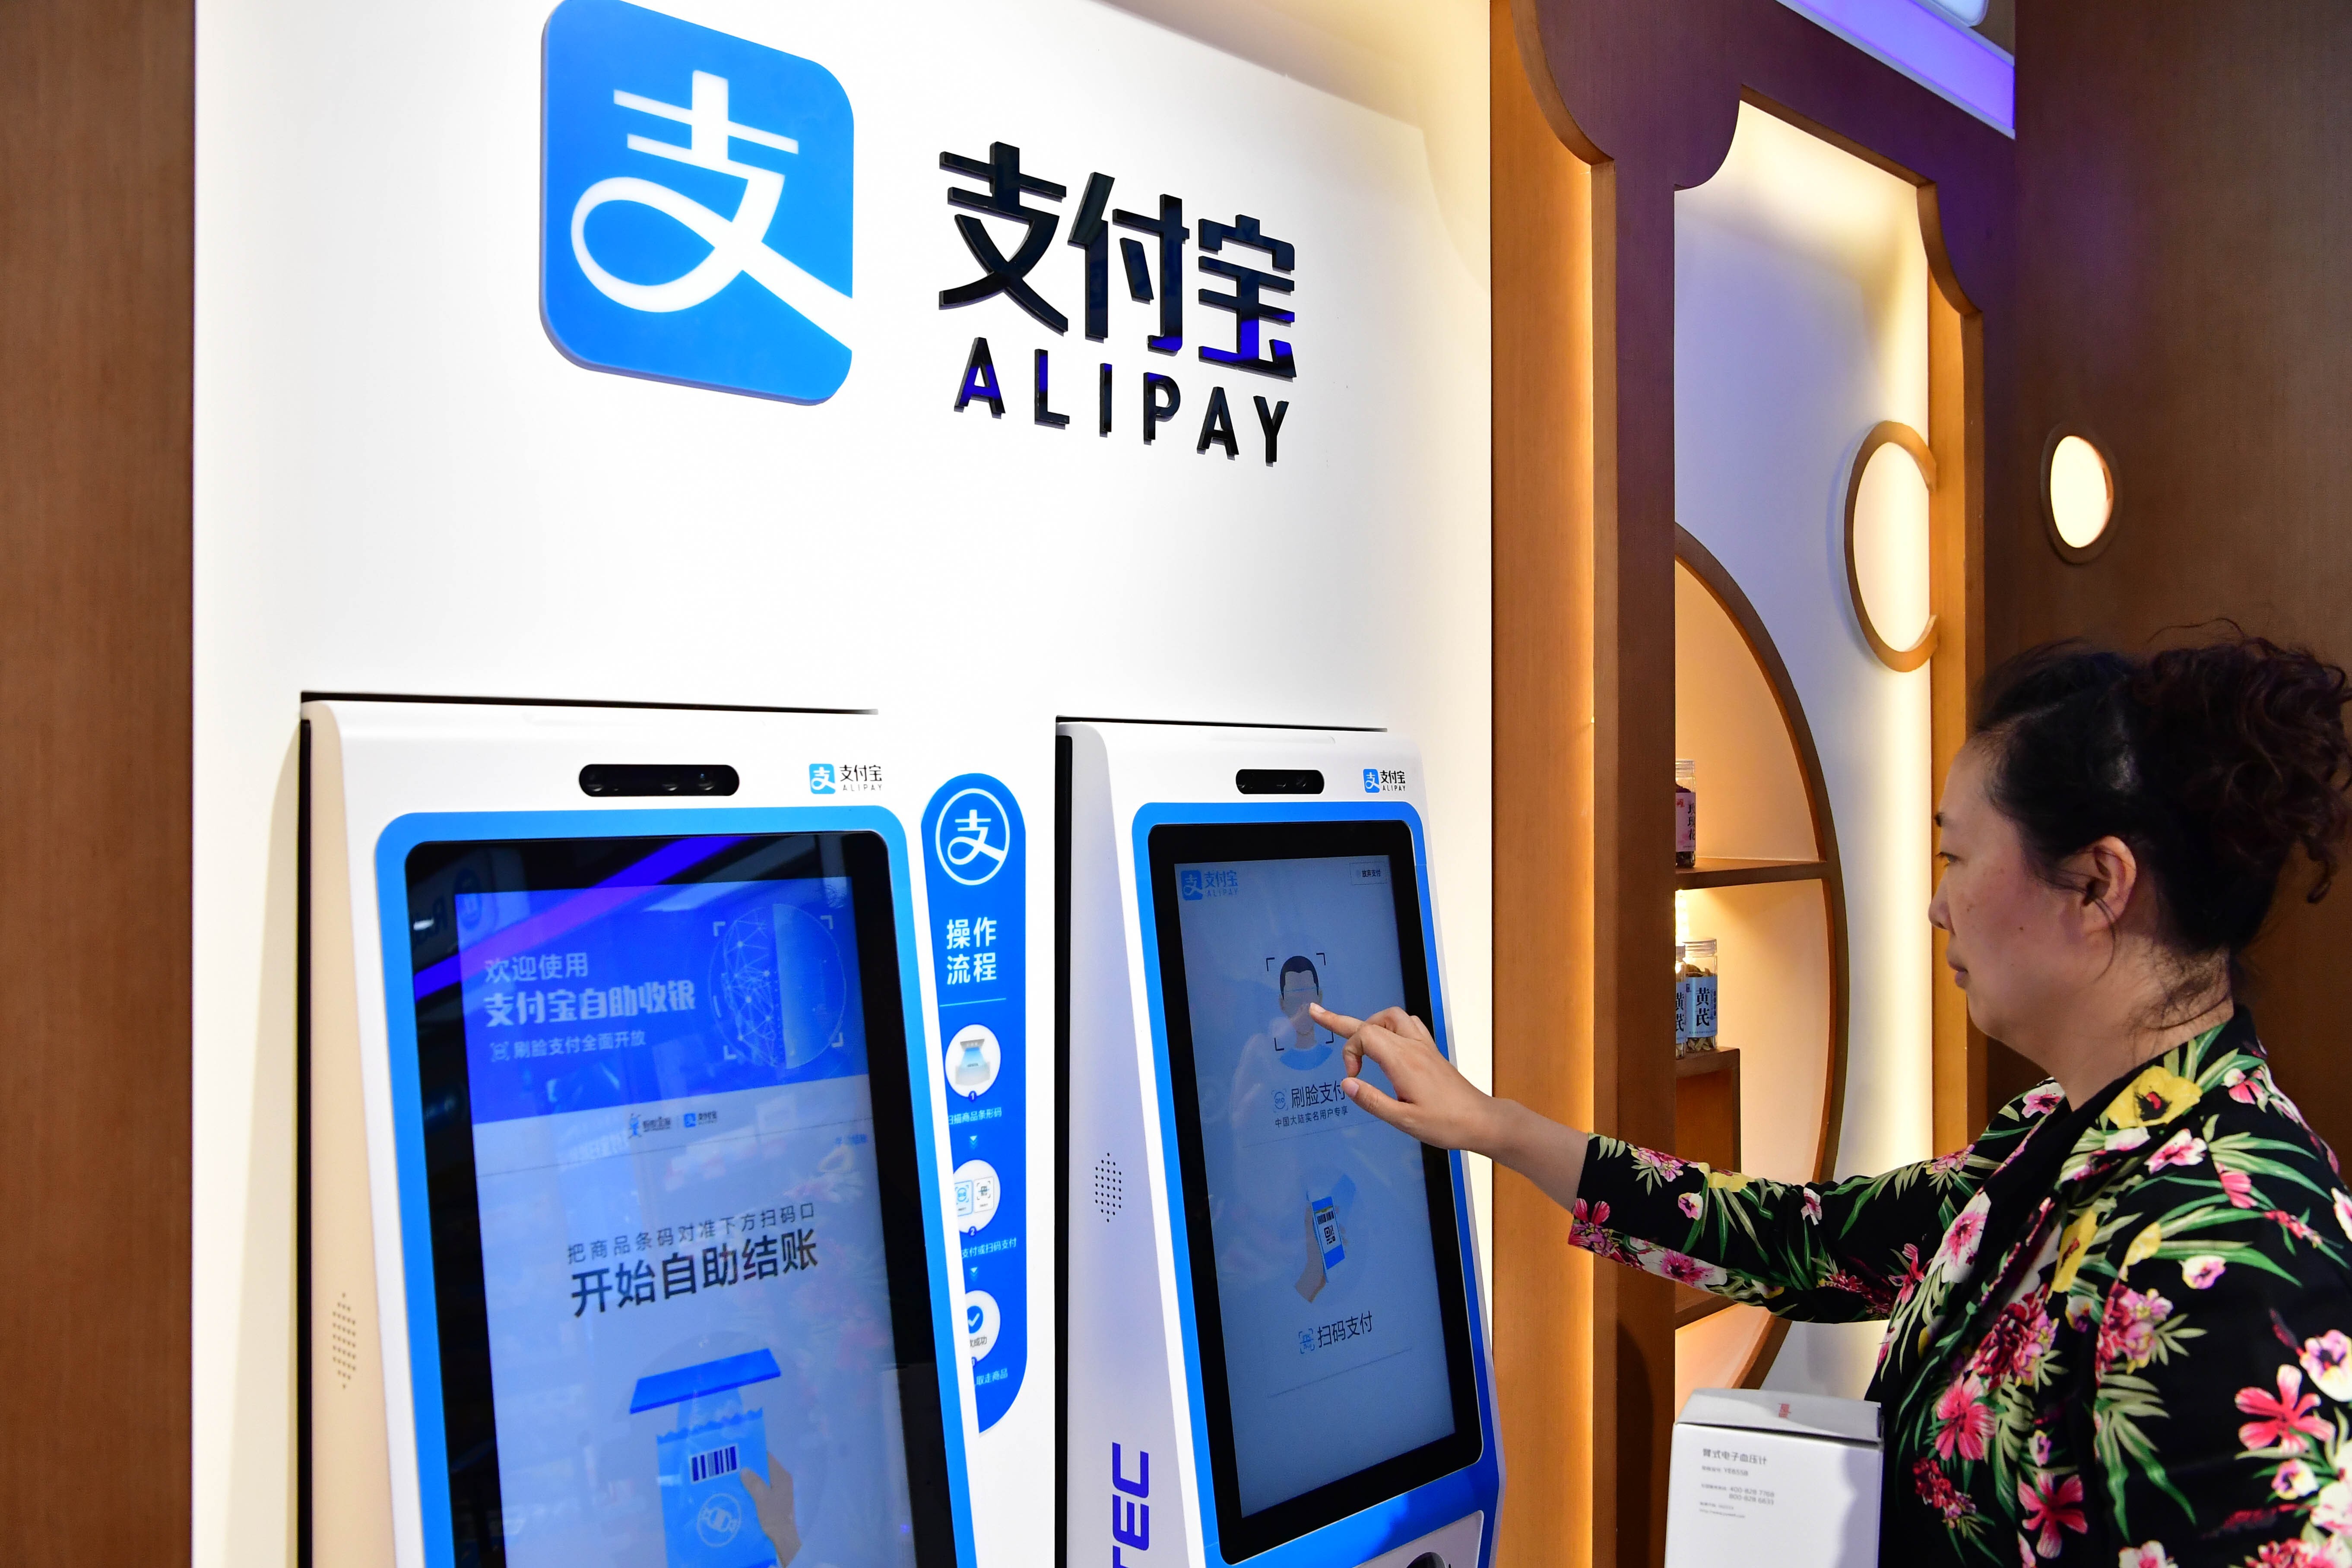 China plans to make its digital currency available through four state-owned banks, as well as online payment platforms like Alipay. Photo: Xinhua